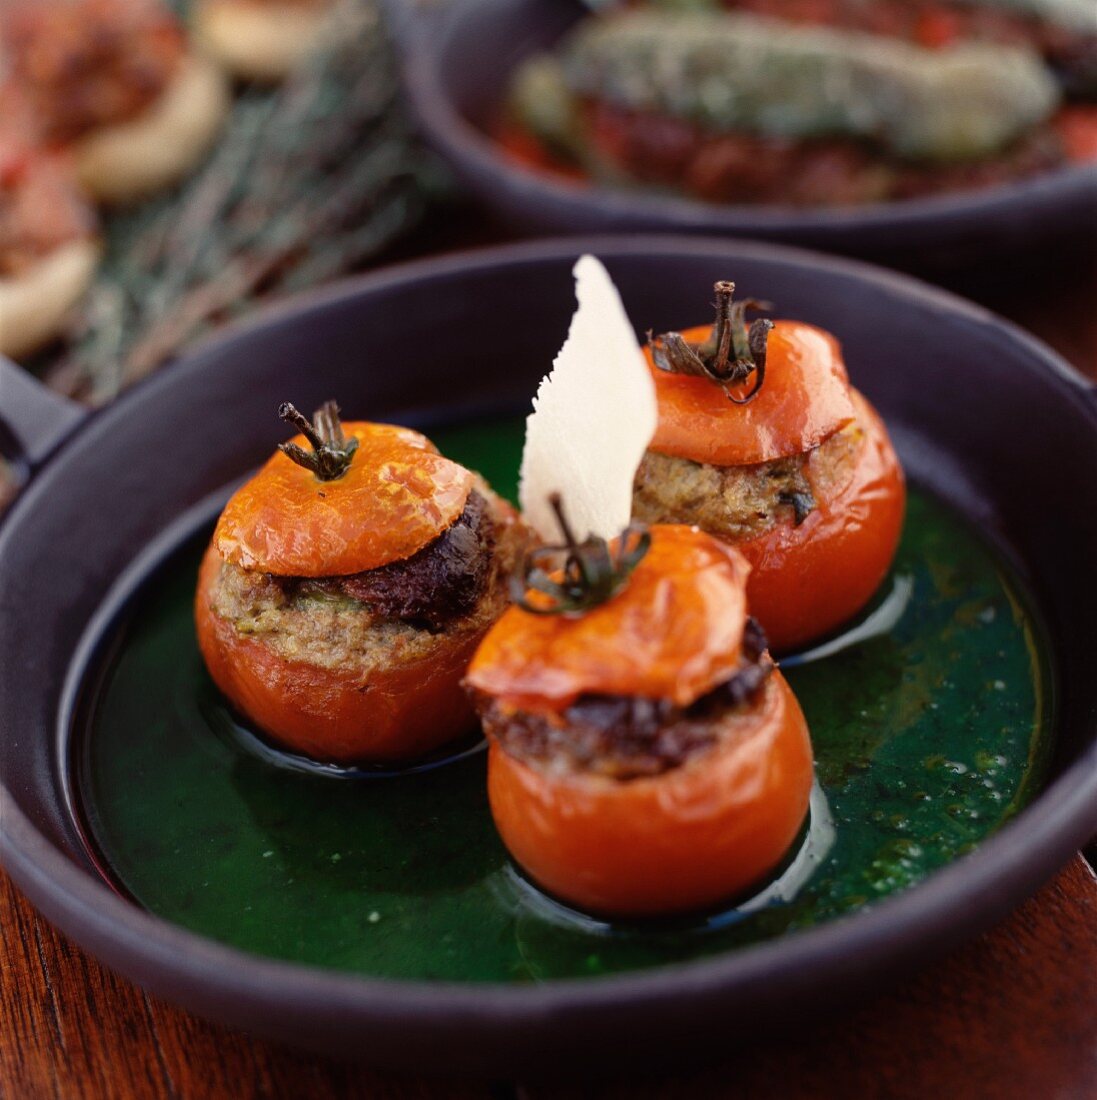 Stuffed tomatoes with Parmesan in a green sauce